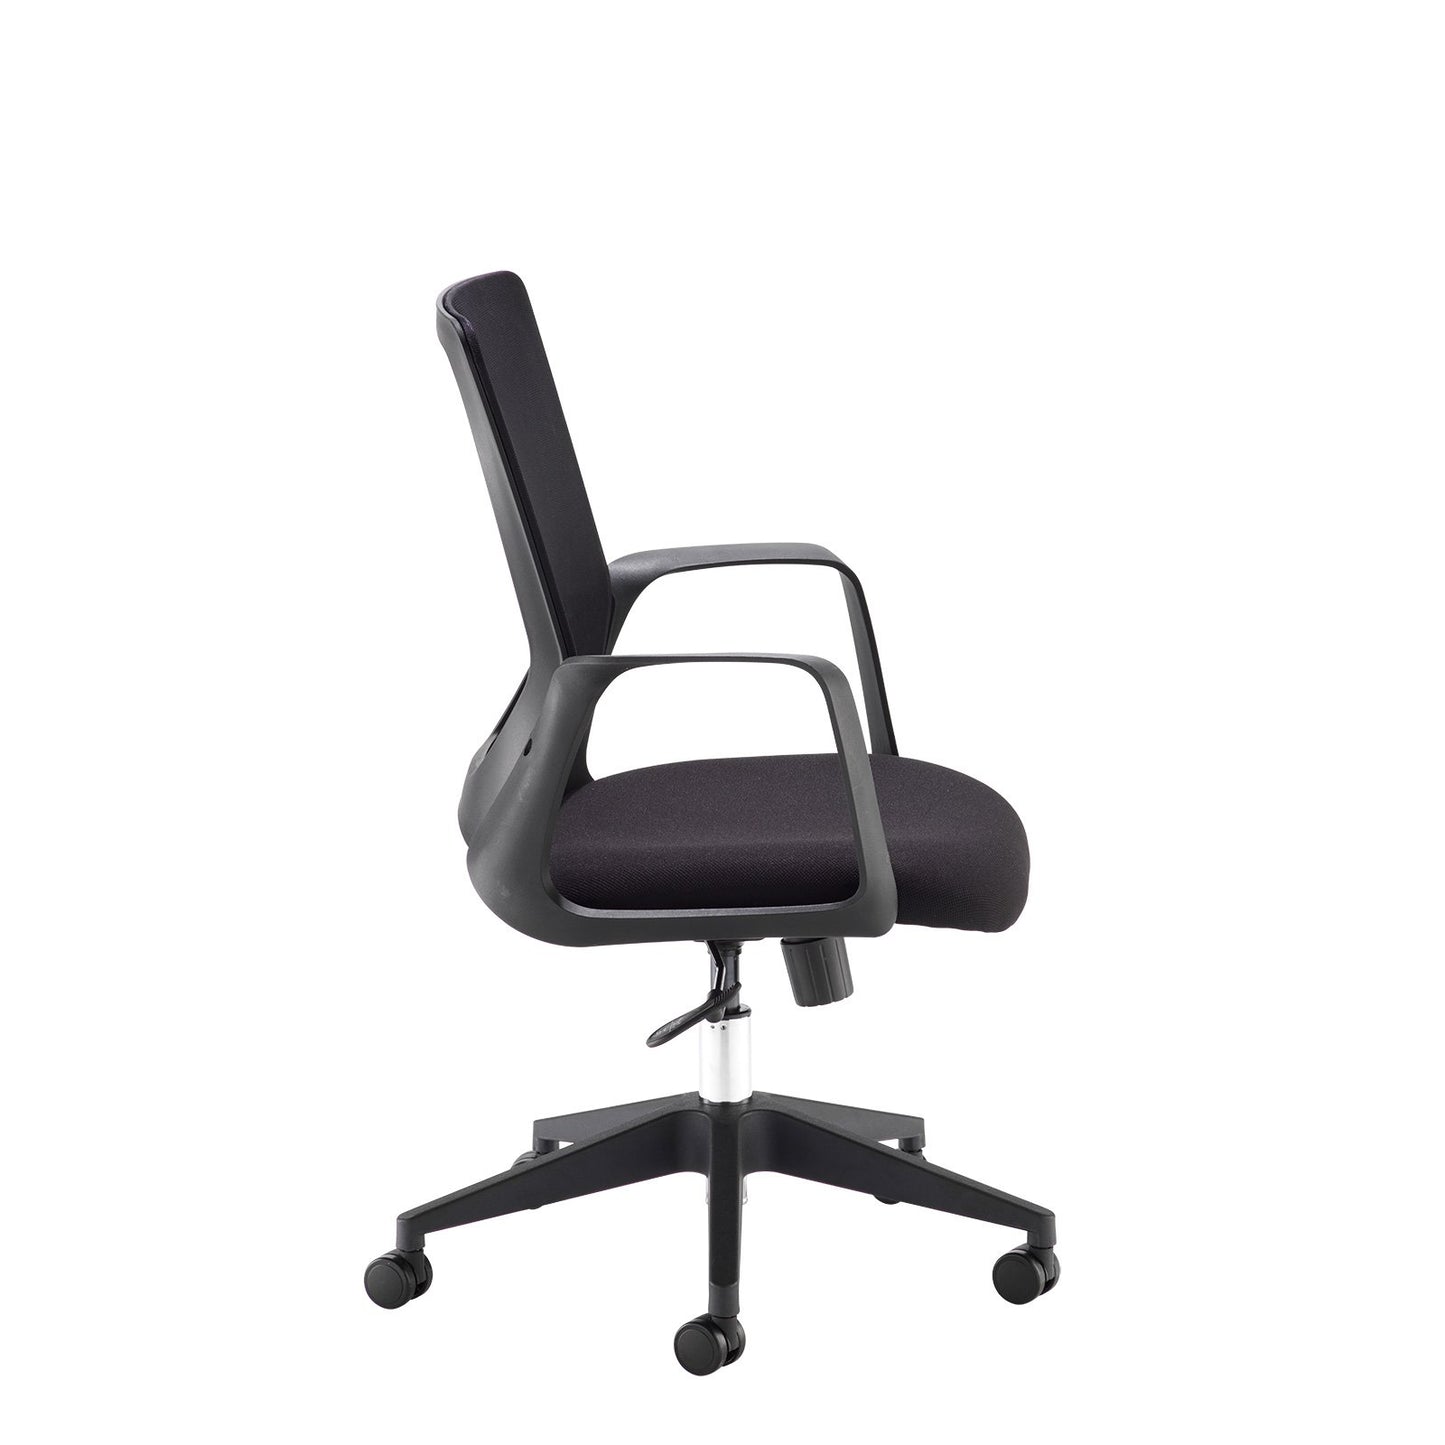 Toto mesh back operator chair